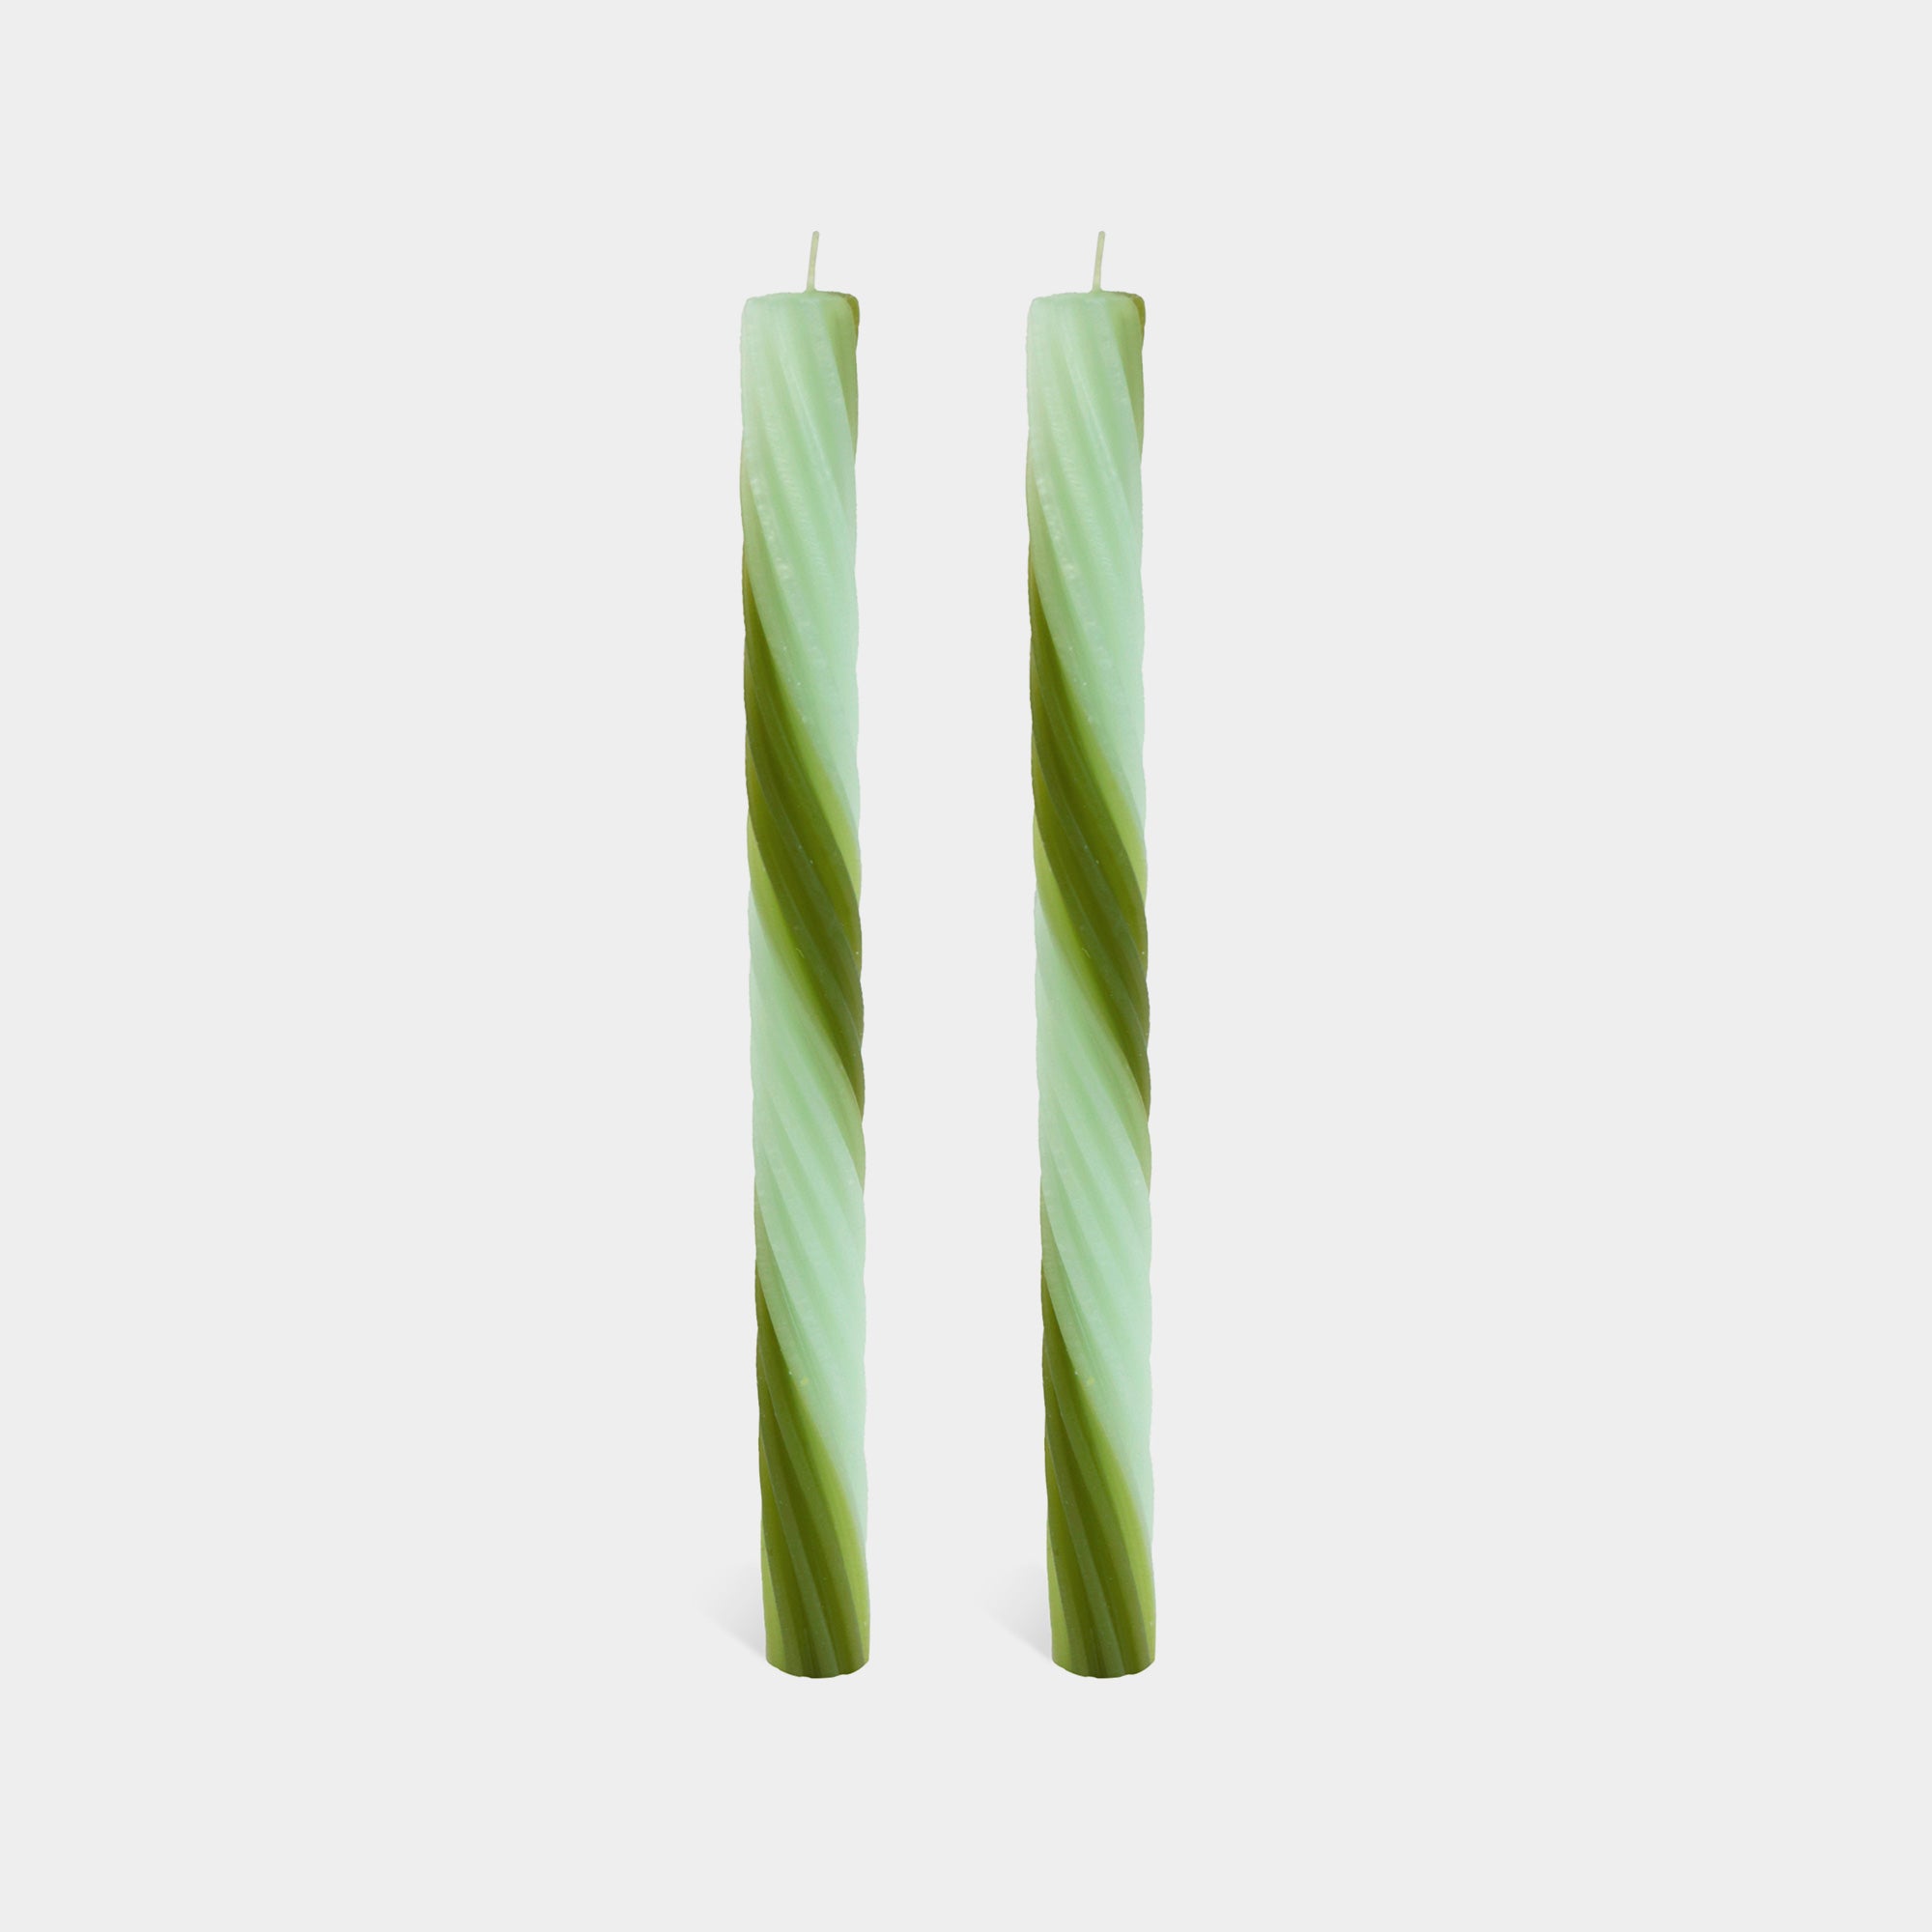 Rope Candles - Green (2 pack)